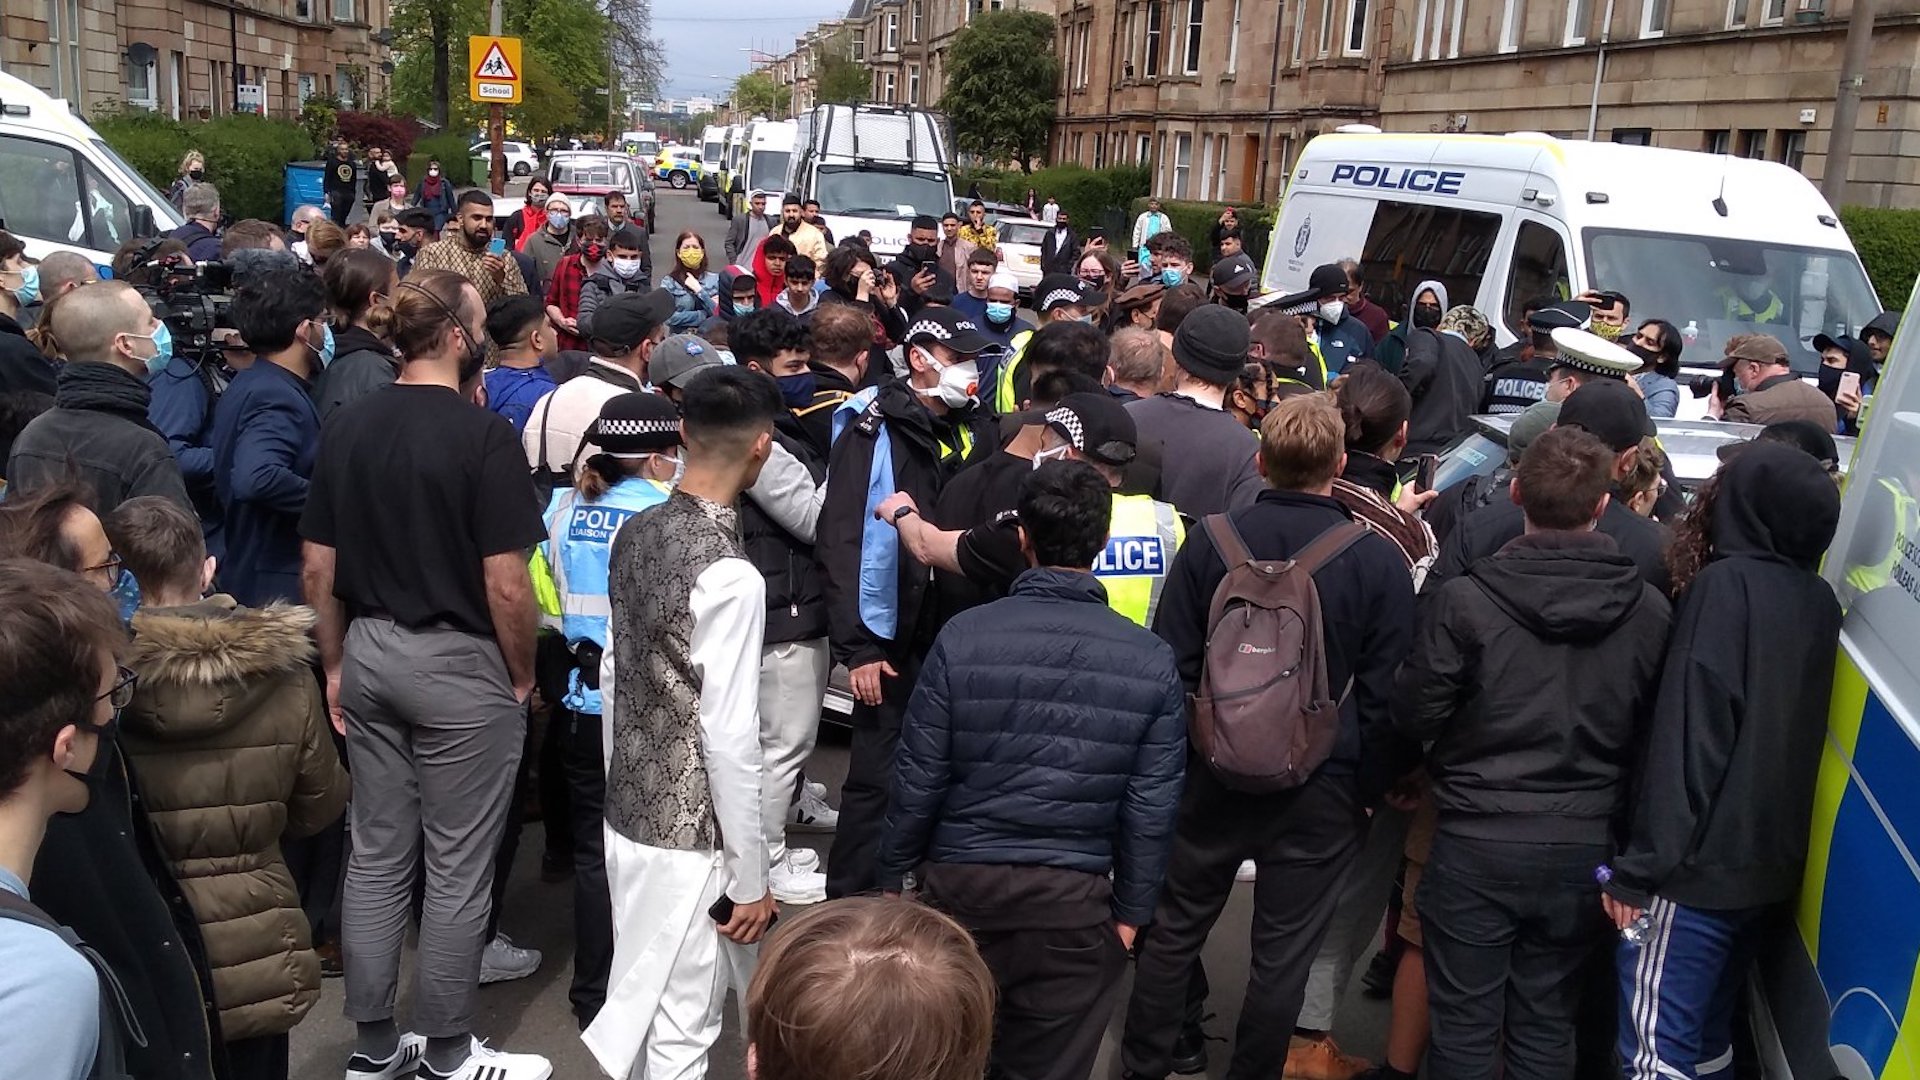 Locals surrounding the Home Office van where two people were reportedly being detained. Image: Benjamin Thomas White